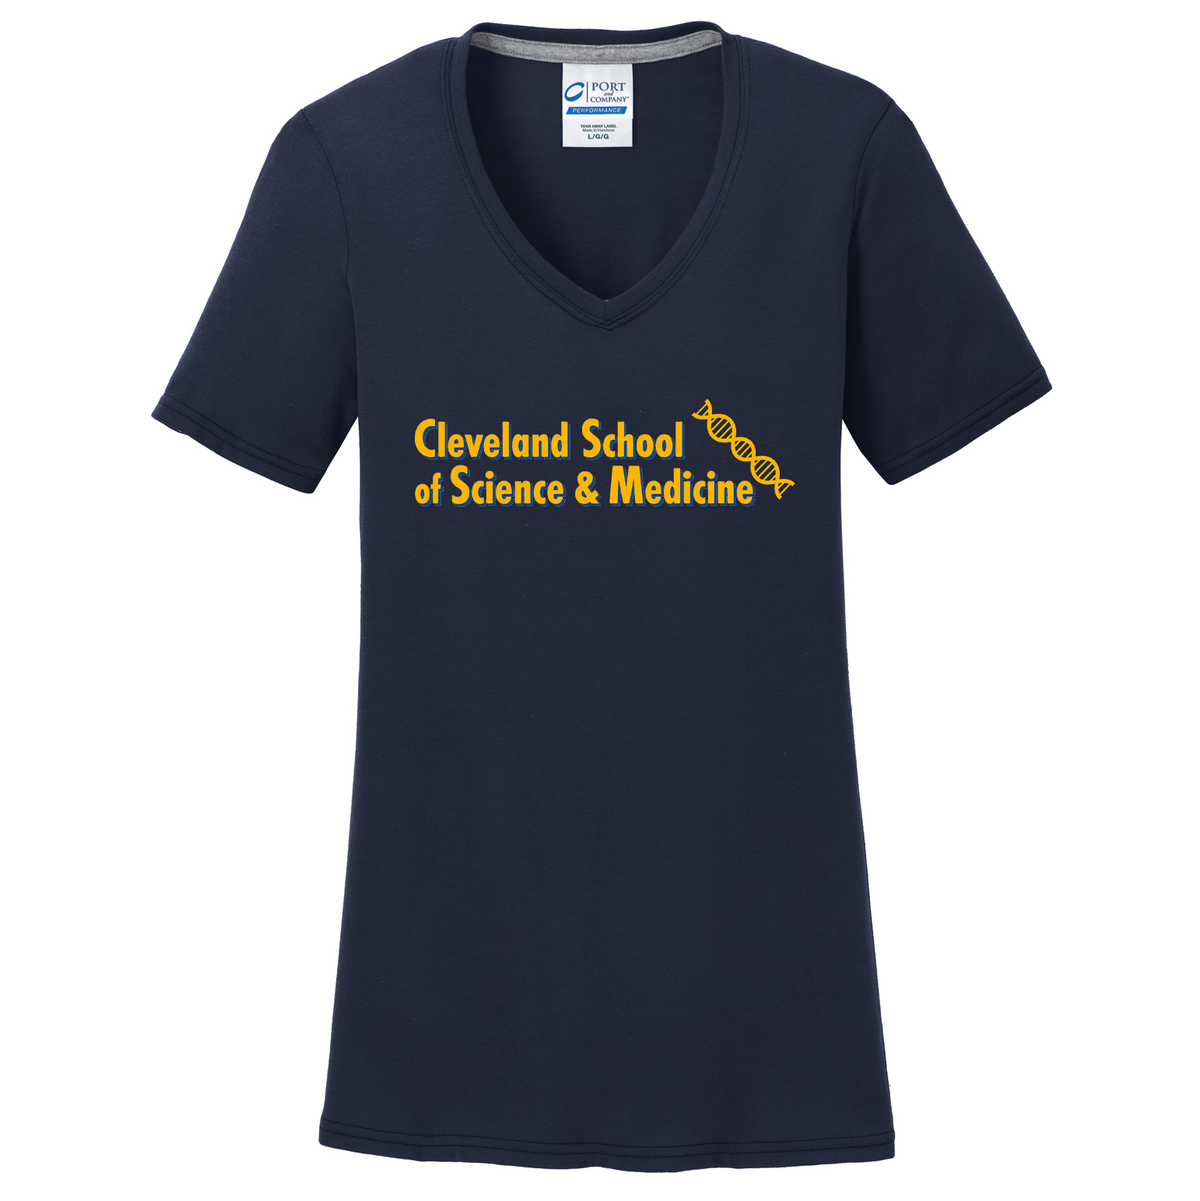 Cleveland School of Science and Medicine Women's T-Shirt